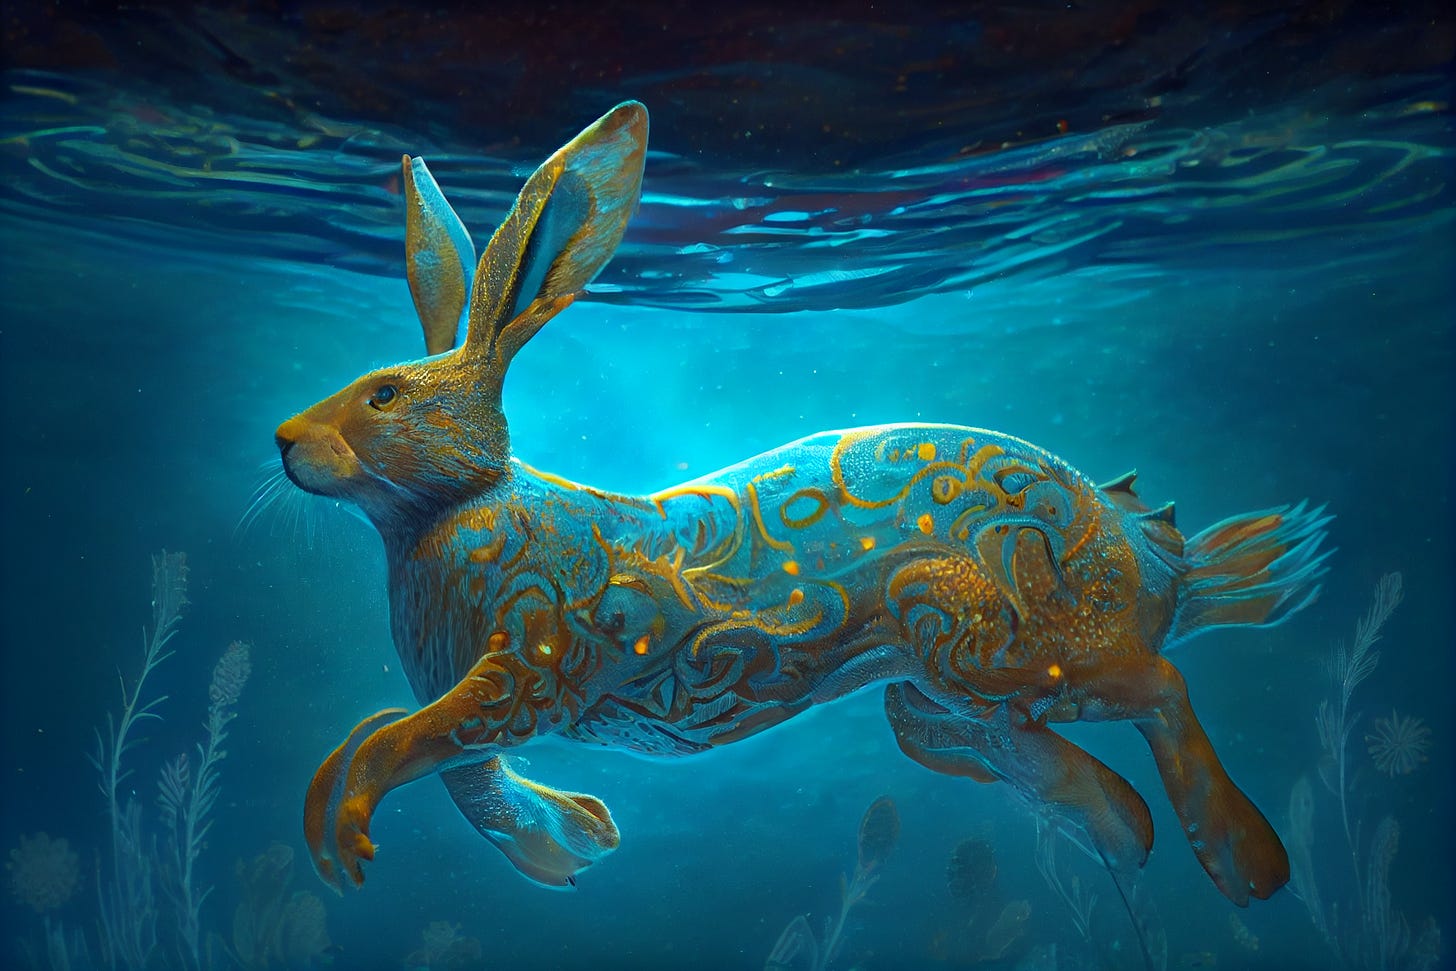 Magical underwater rabbit in honor of the year of the water rabbit.